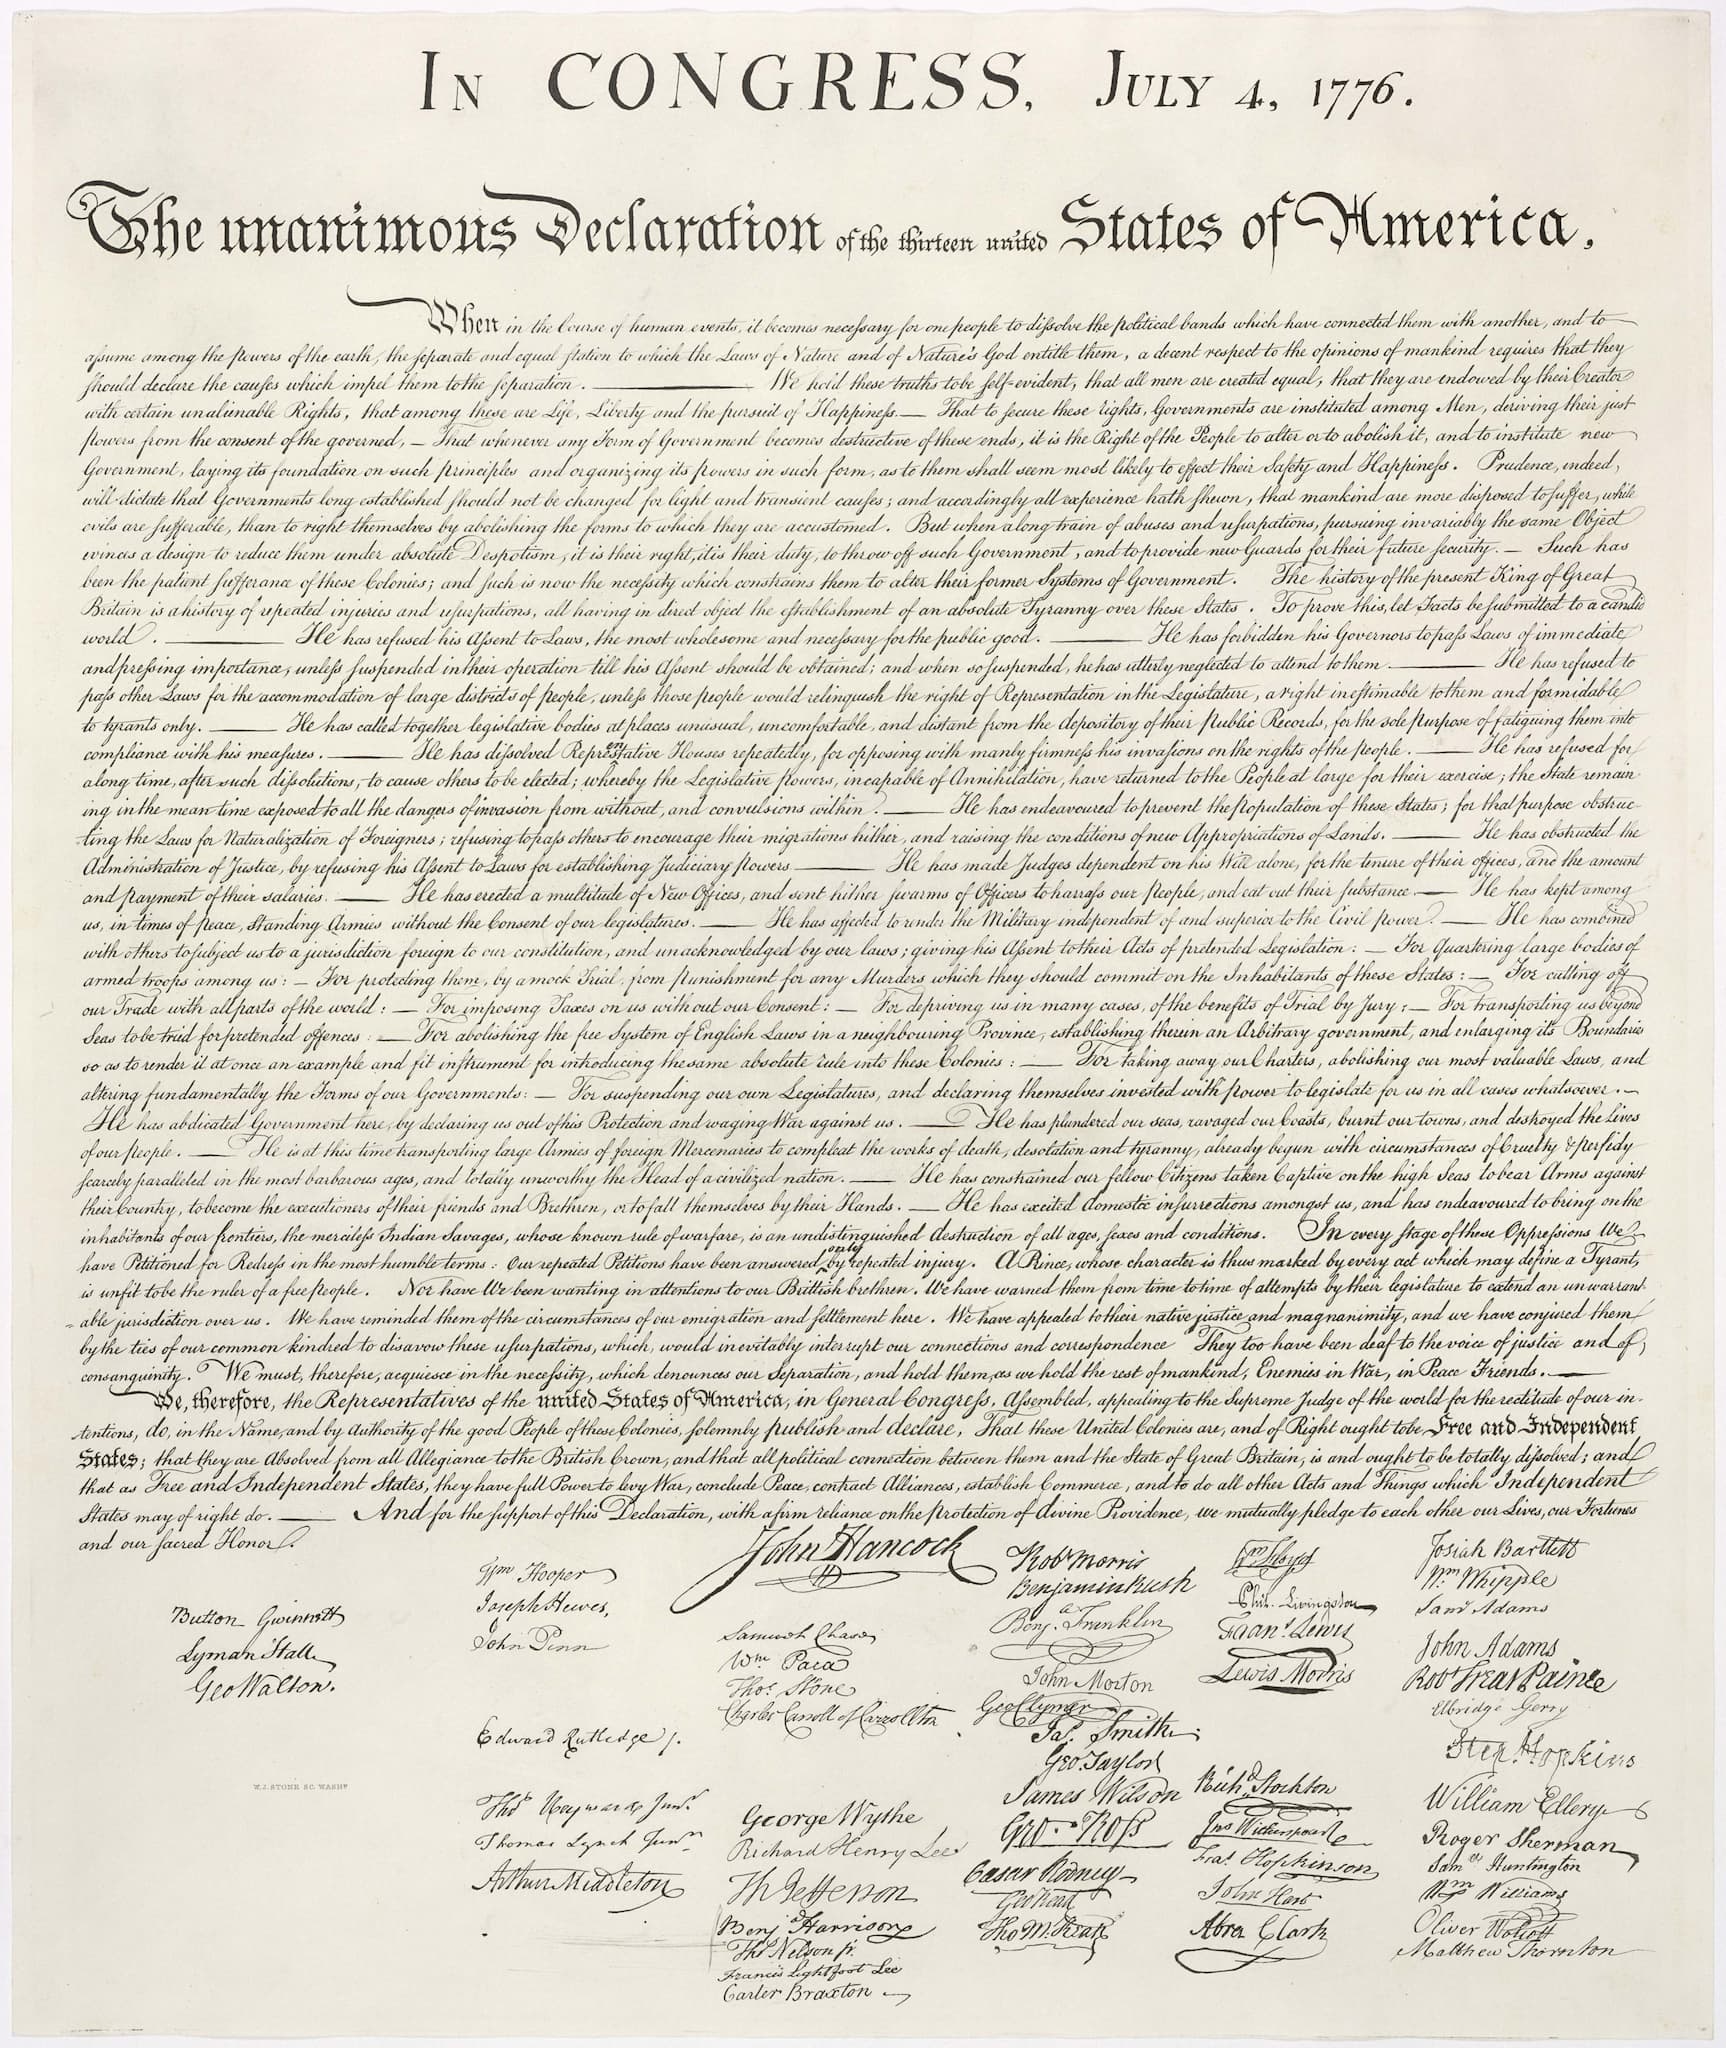 Print #3 of the Declaration of Independence, DEMOCRACY, Craft in America